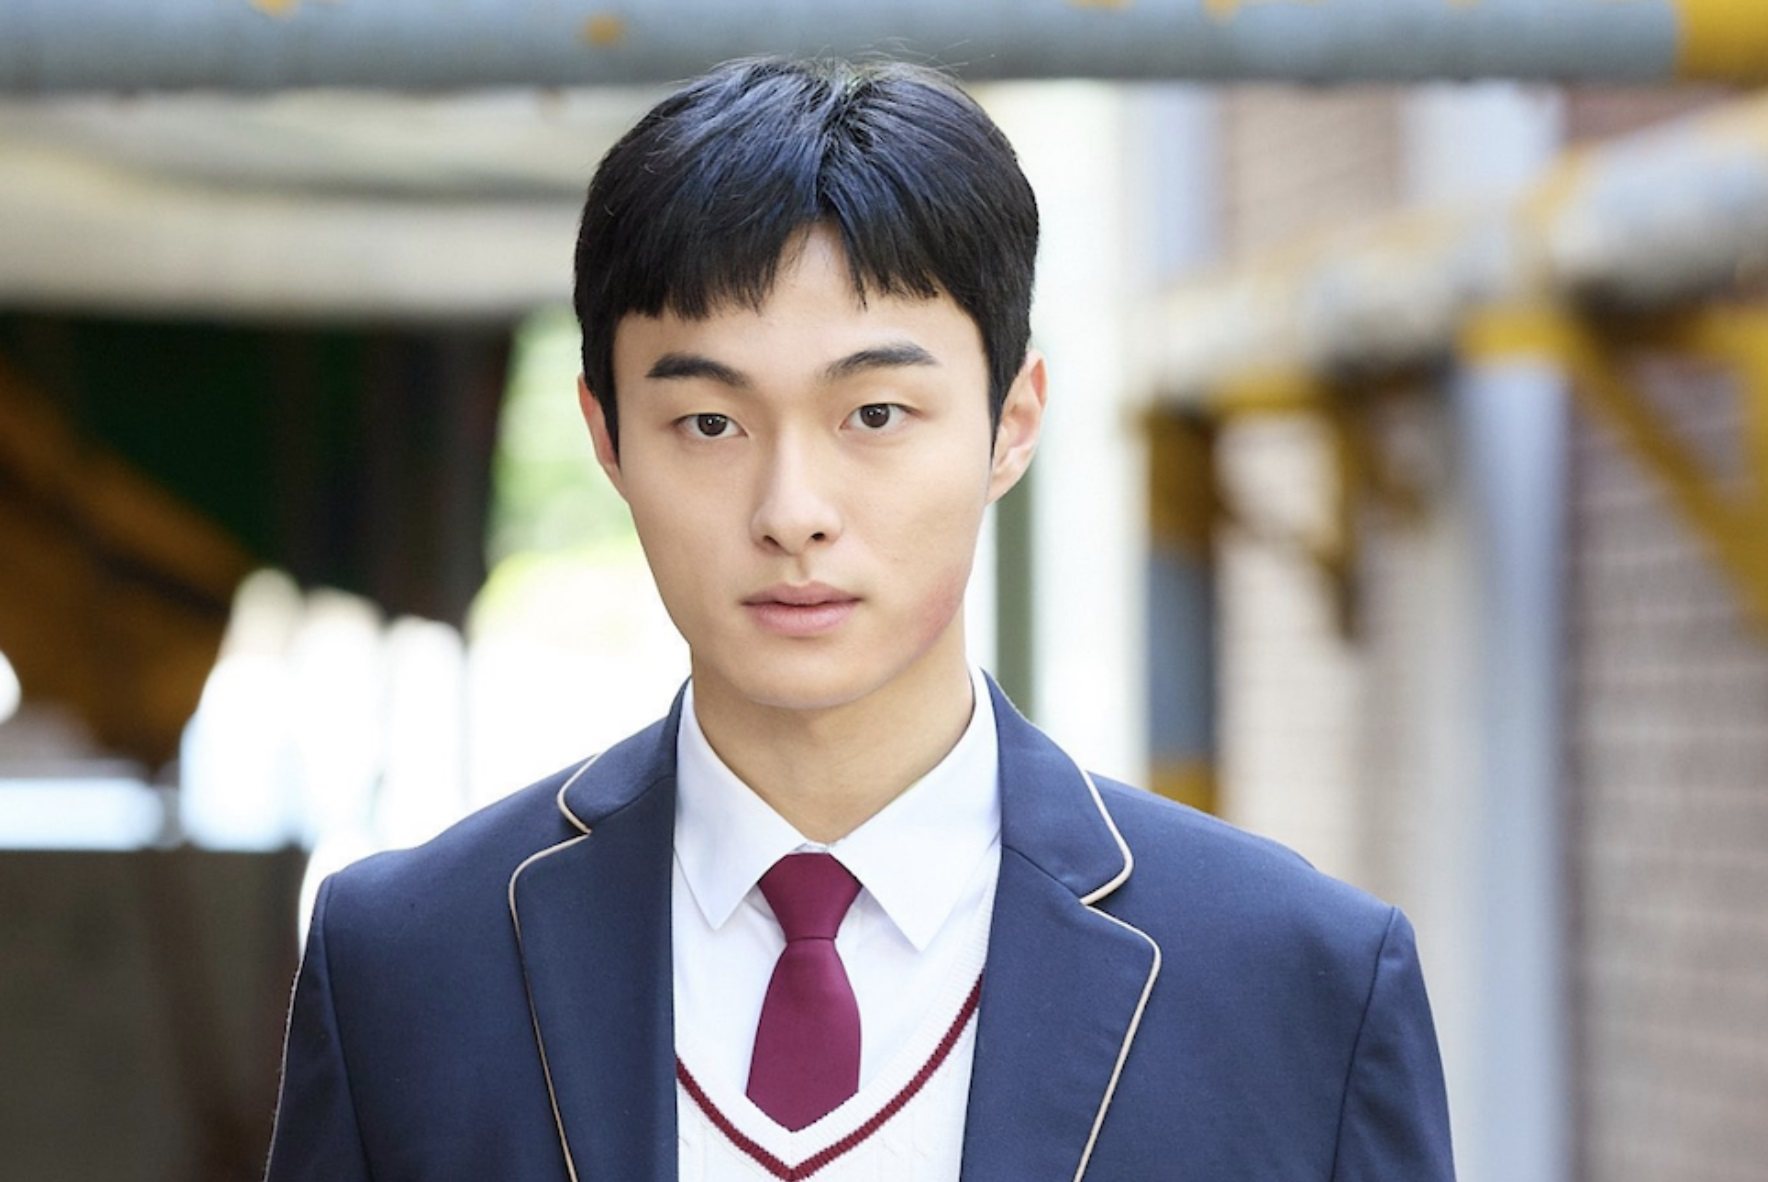 Yoon Chan-young as student Yi-heon/Deuk-pal in a still from High School Return of a Gangster, a K-drama adapted from a webtoon. Bong Jae-hyun and Lee Seo-jin co-star. 